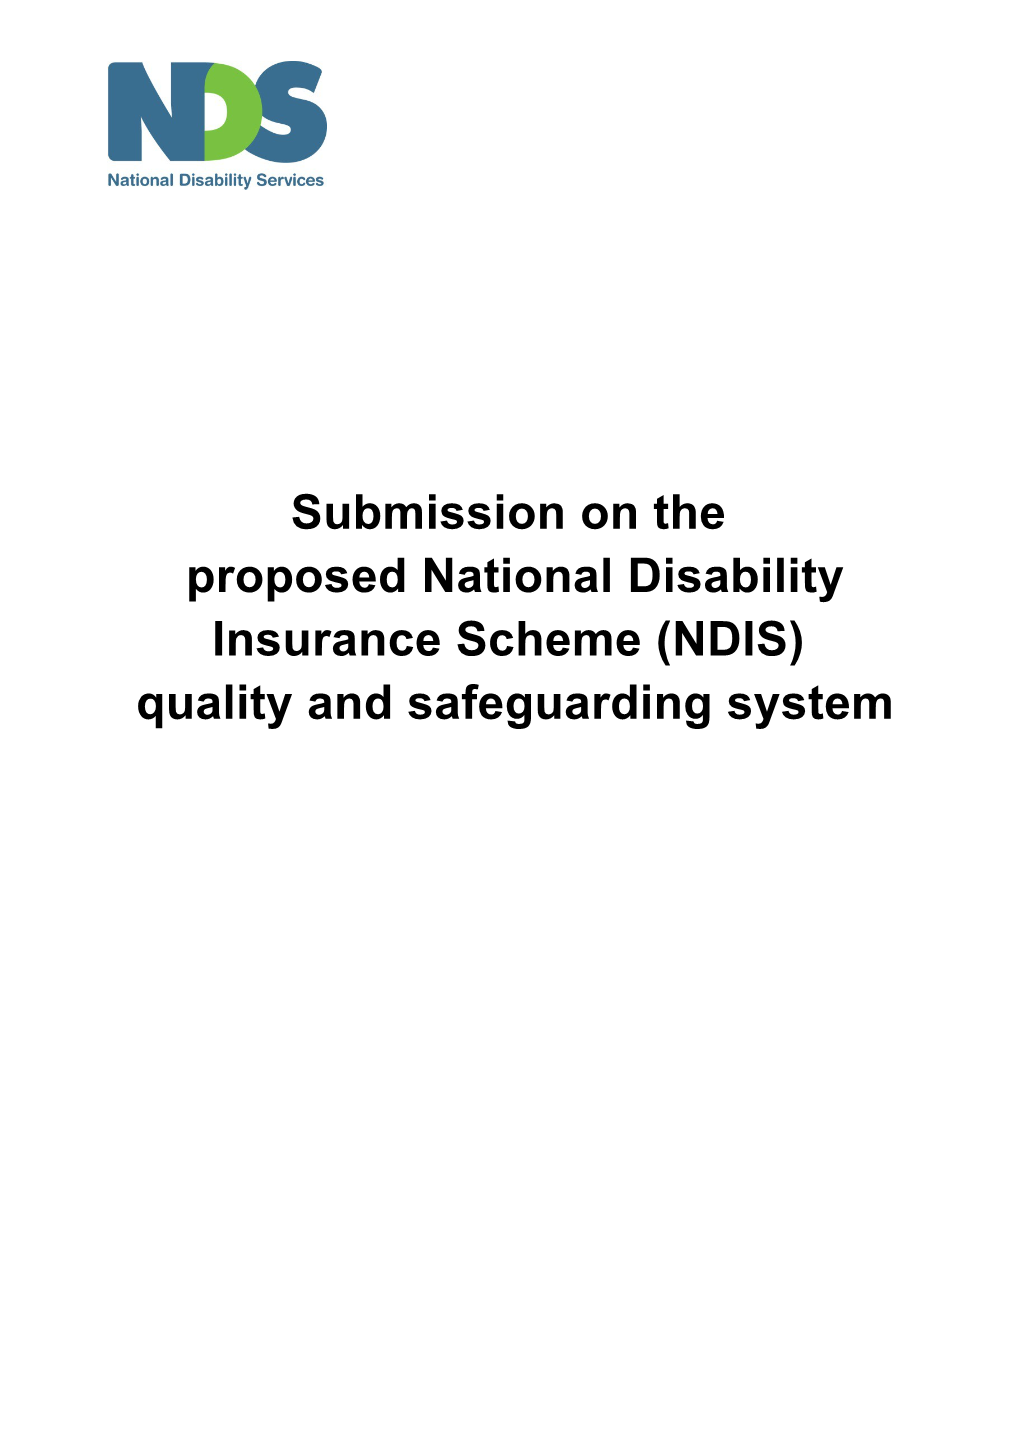 National Disability Services Submission on NDIS Quality and Safeguarding April 2015